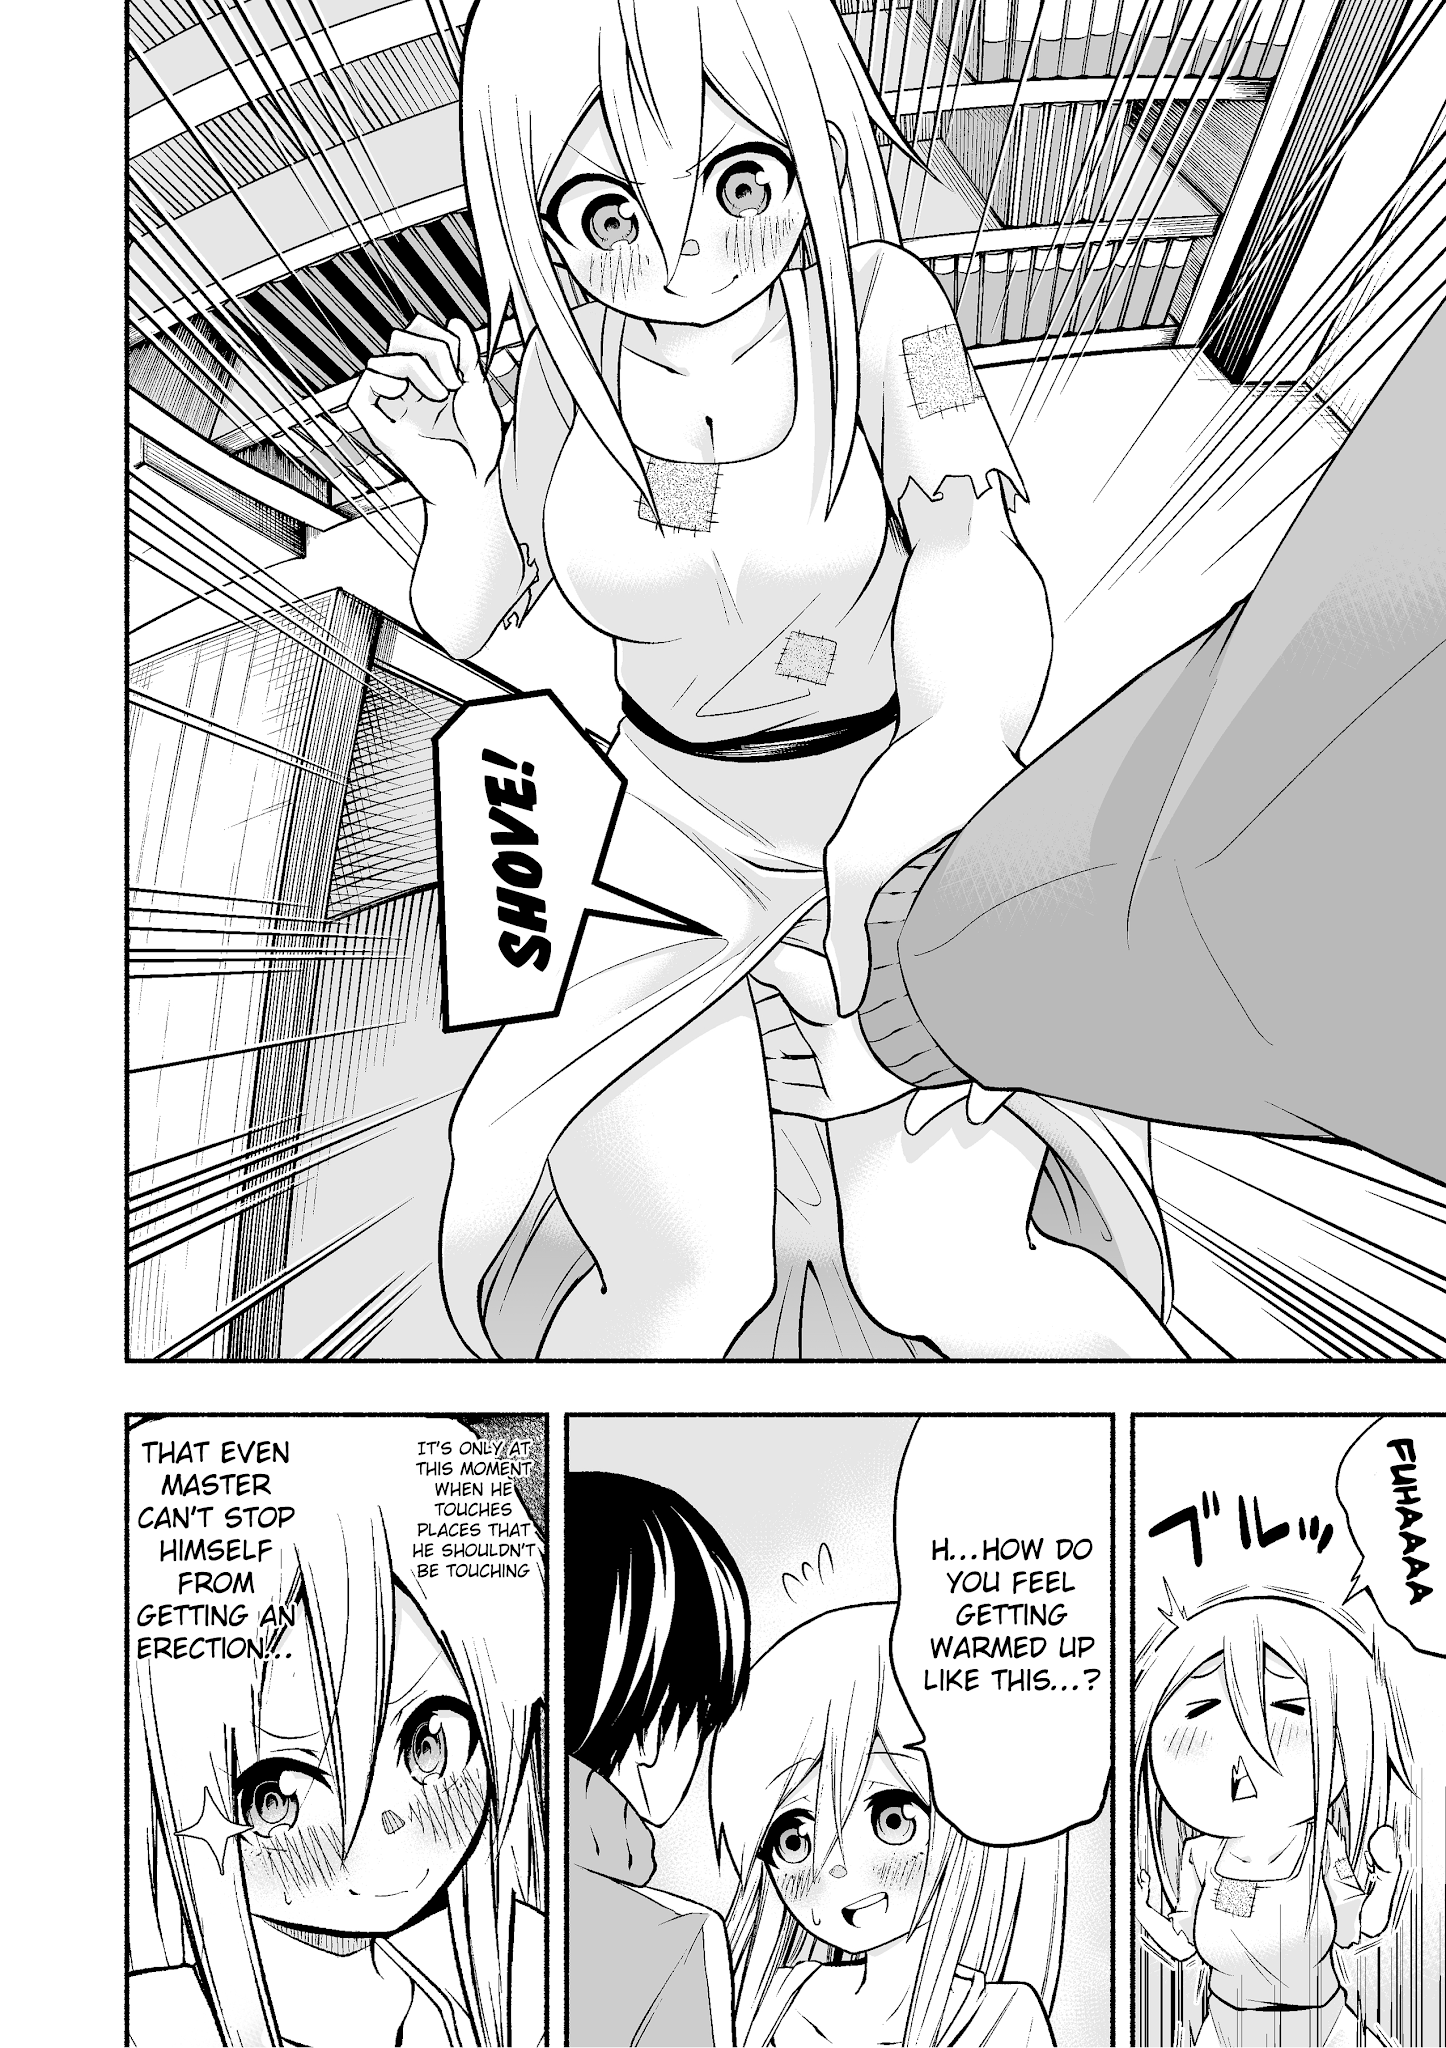 A Slave Who Wants To Do Perverted Things With Her Master - Page 2